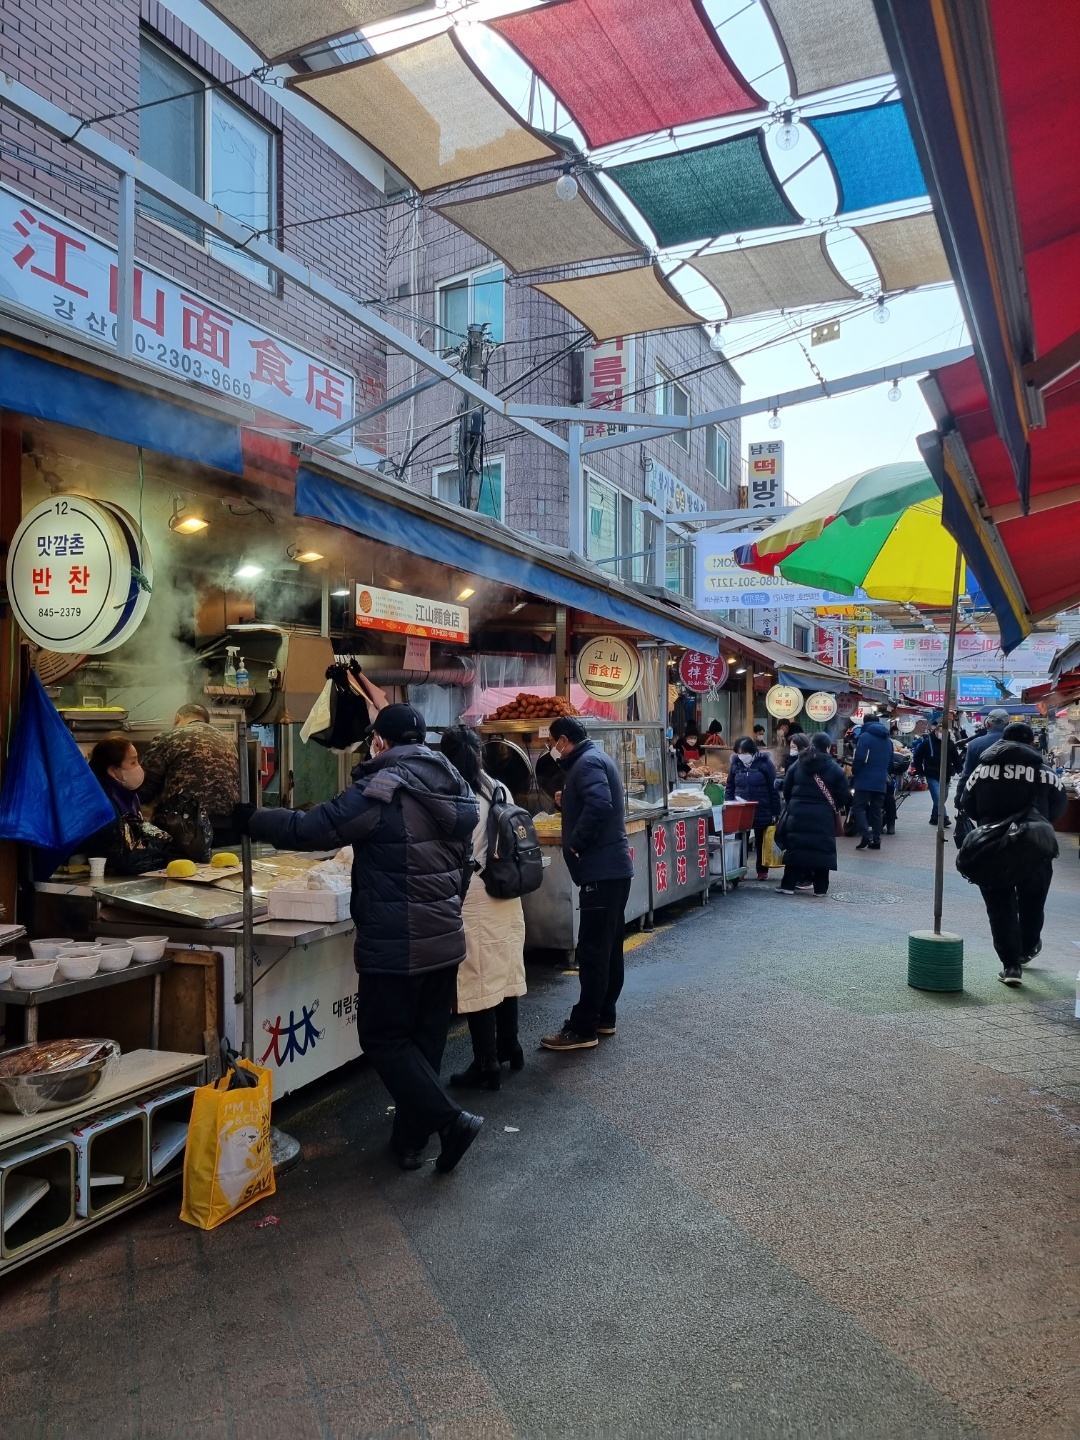 People buy freshly baked bread and rice cake at Daerim Central Market in Yeongdeungpo-gu, Seoul. (The Korea Herald)